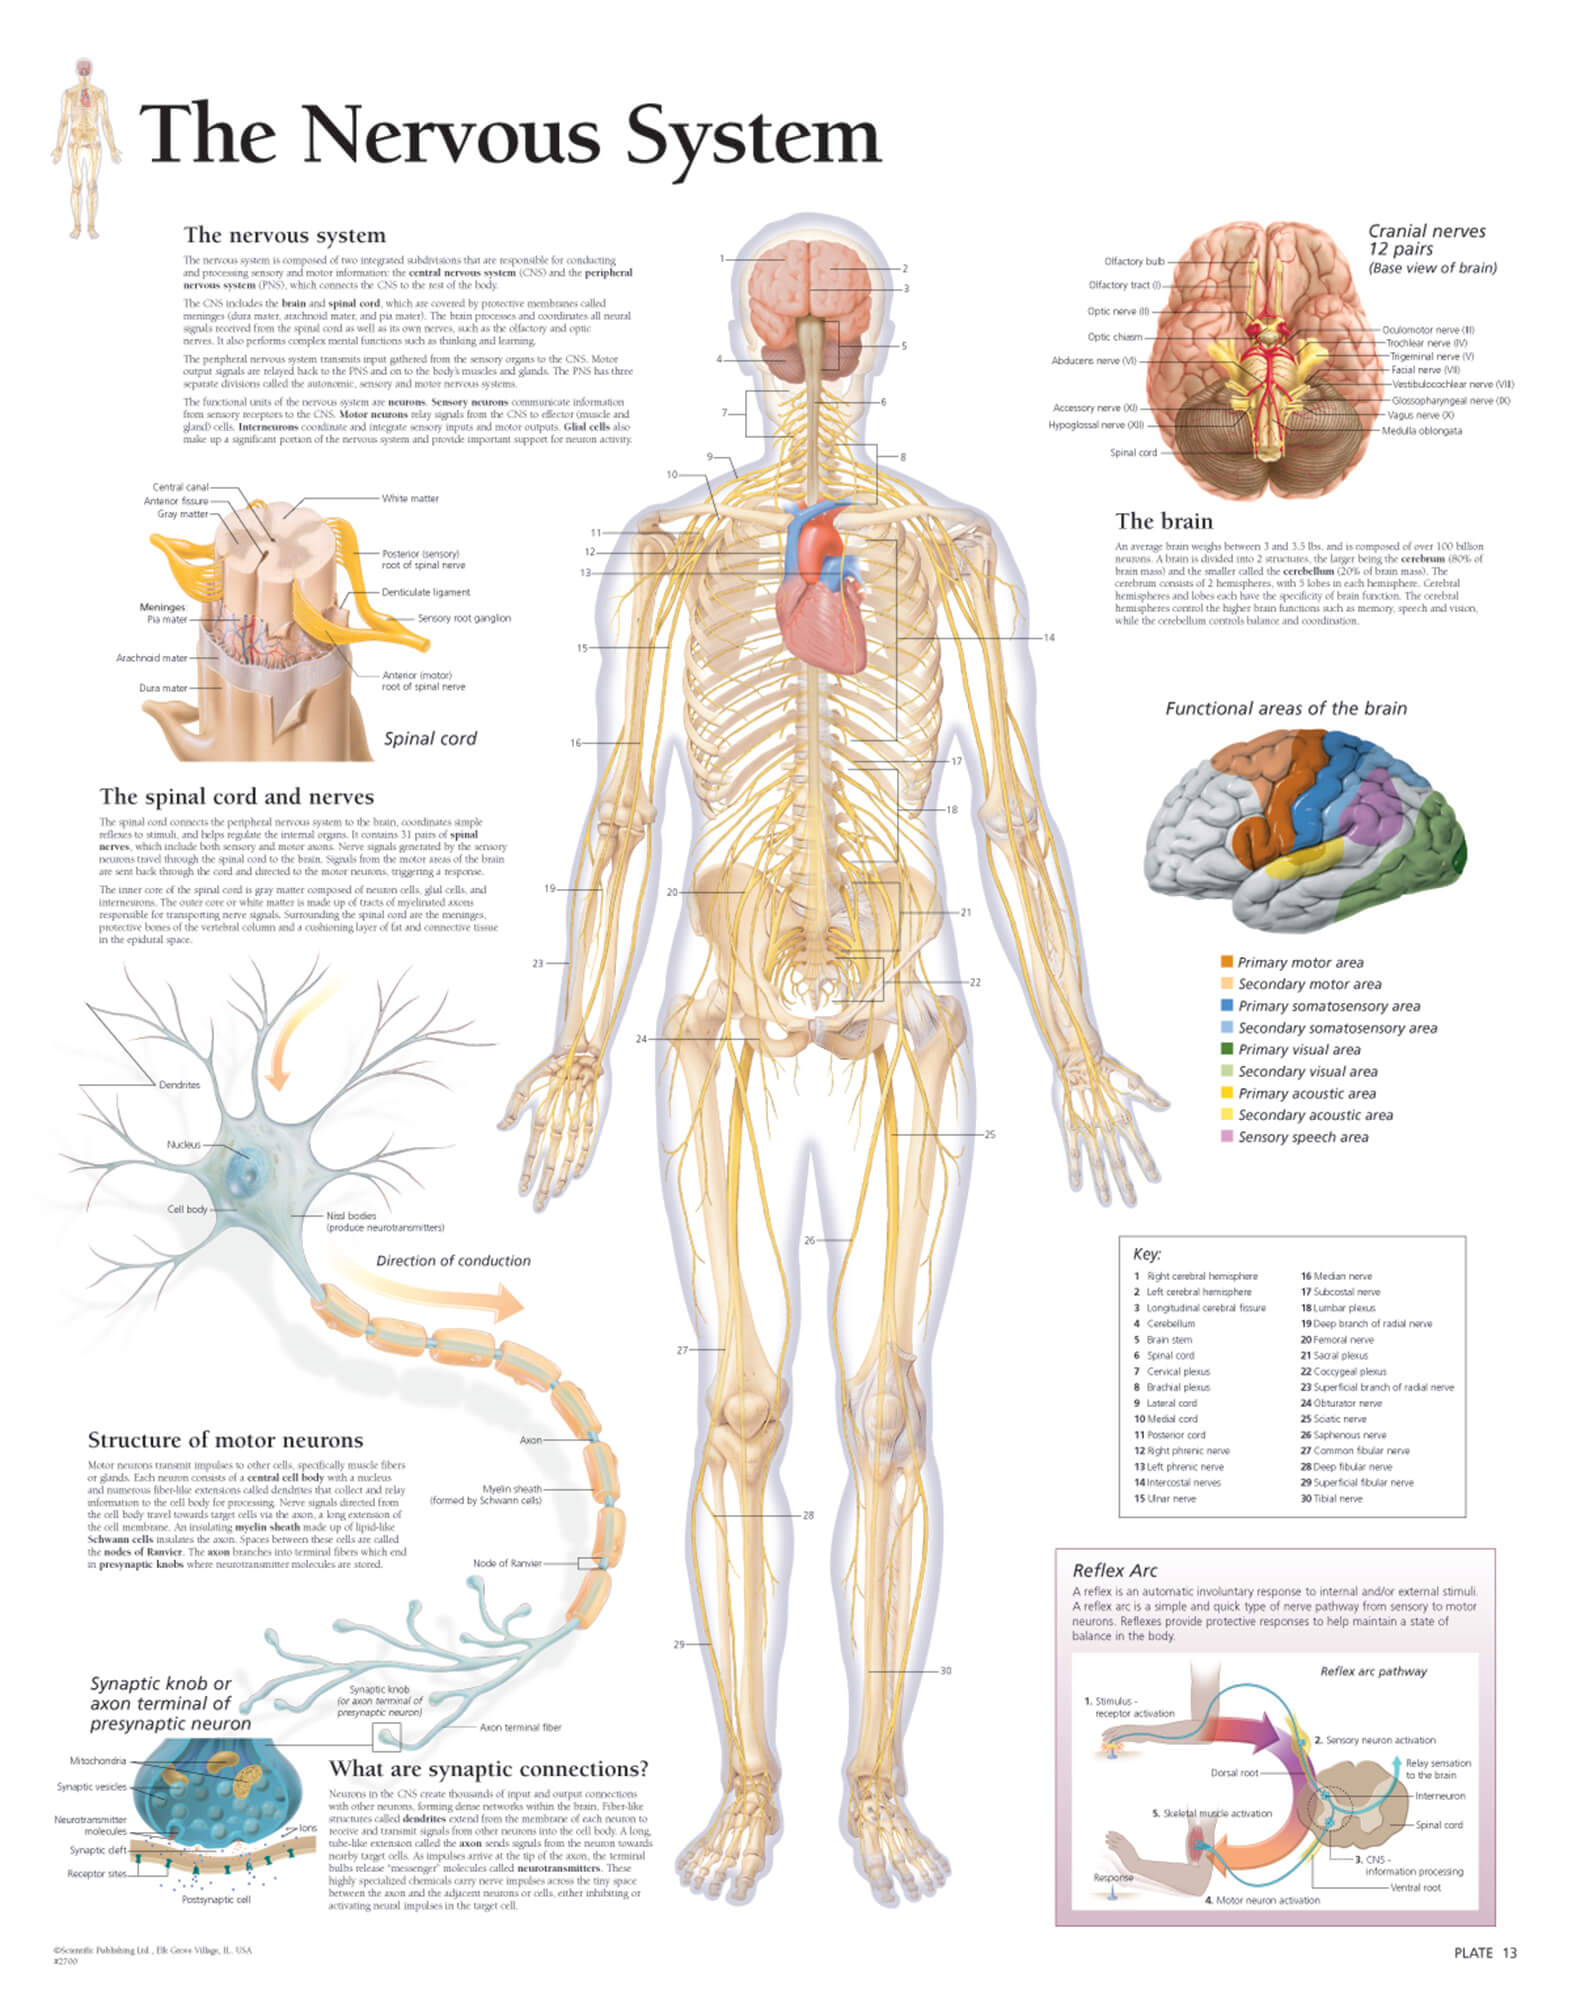 https://www.scientificpublishing.com/wp-content/uploads/2017/05/nervous-system-anatomical-wall-chart.jpg